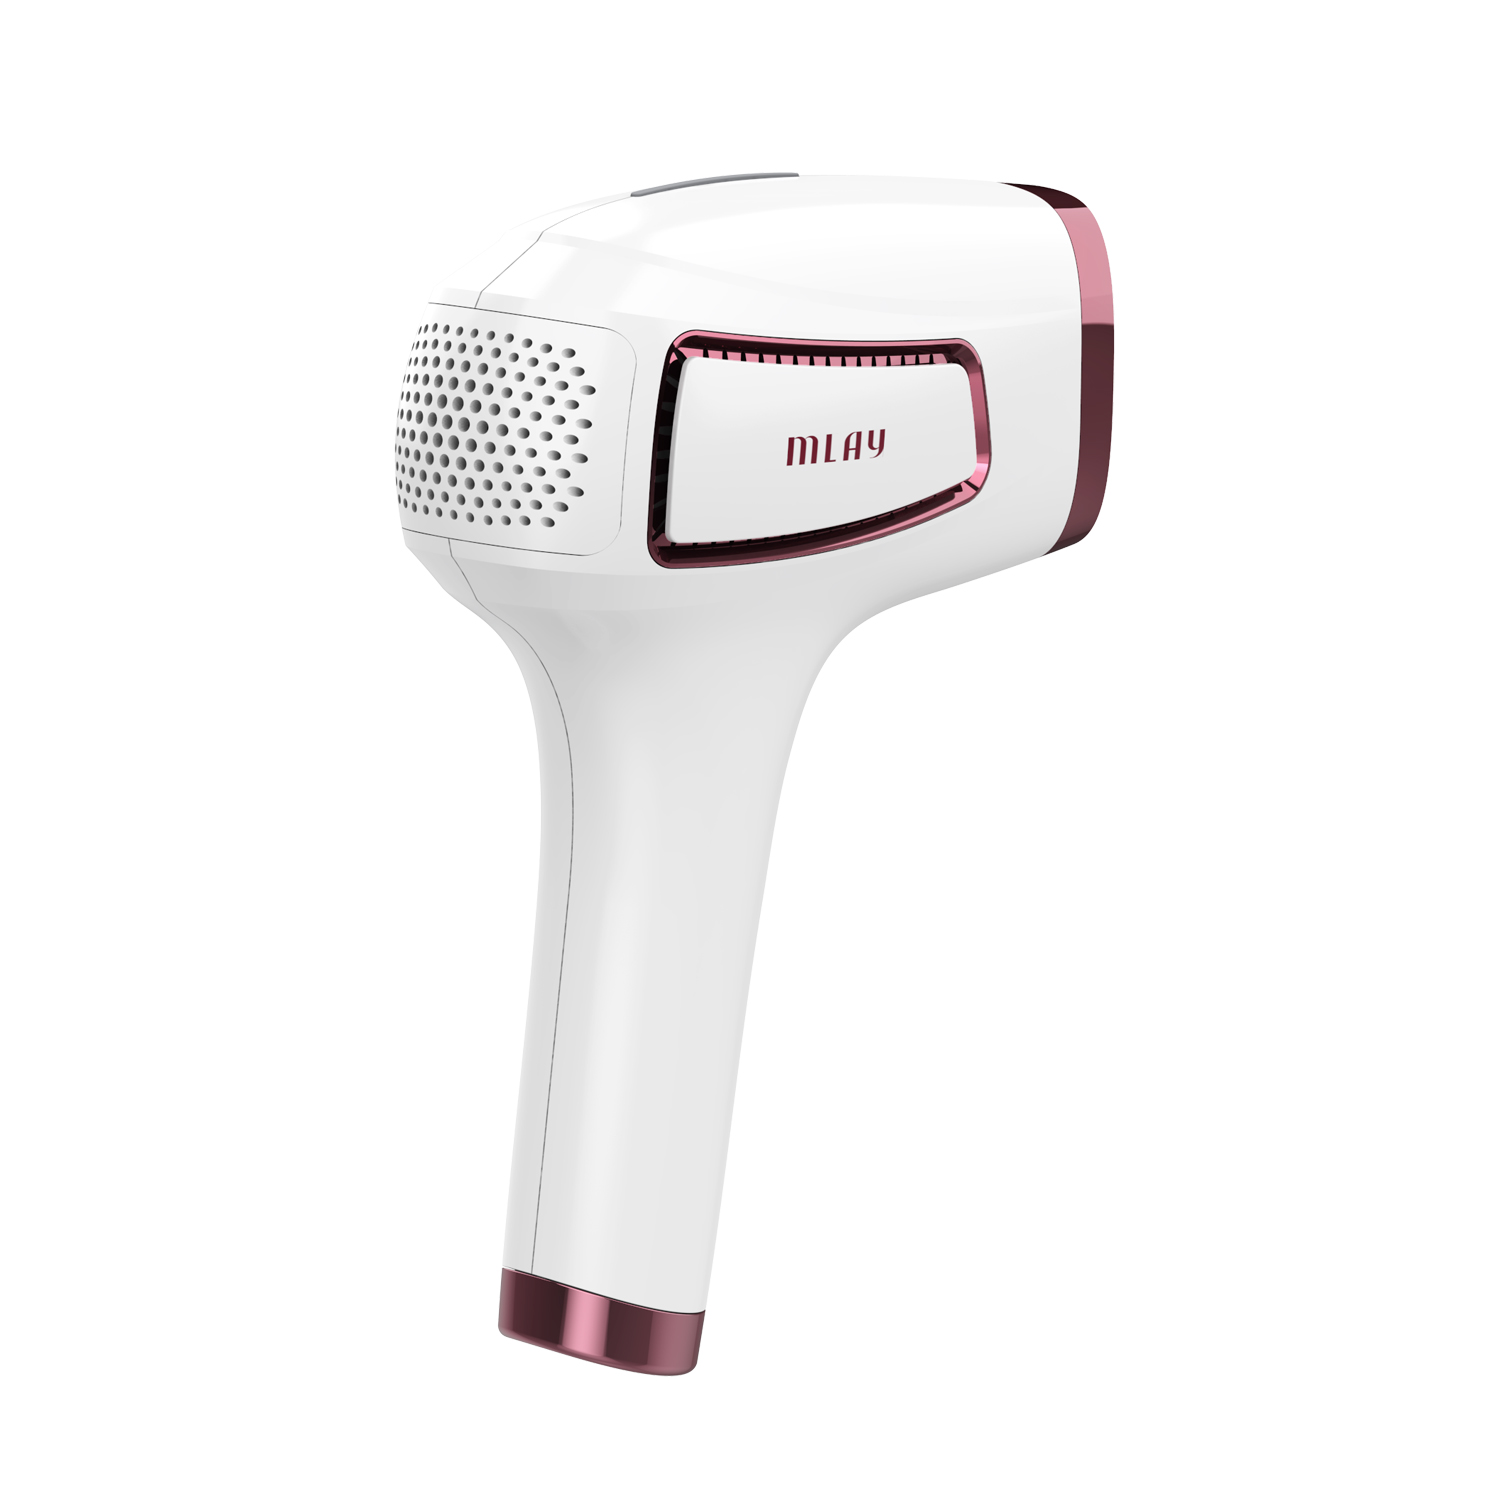 Original Factory ODM & OEM ICE Cold IPL Laser Hair Removal Home Devices Removed Hair Epilator Whole Body